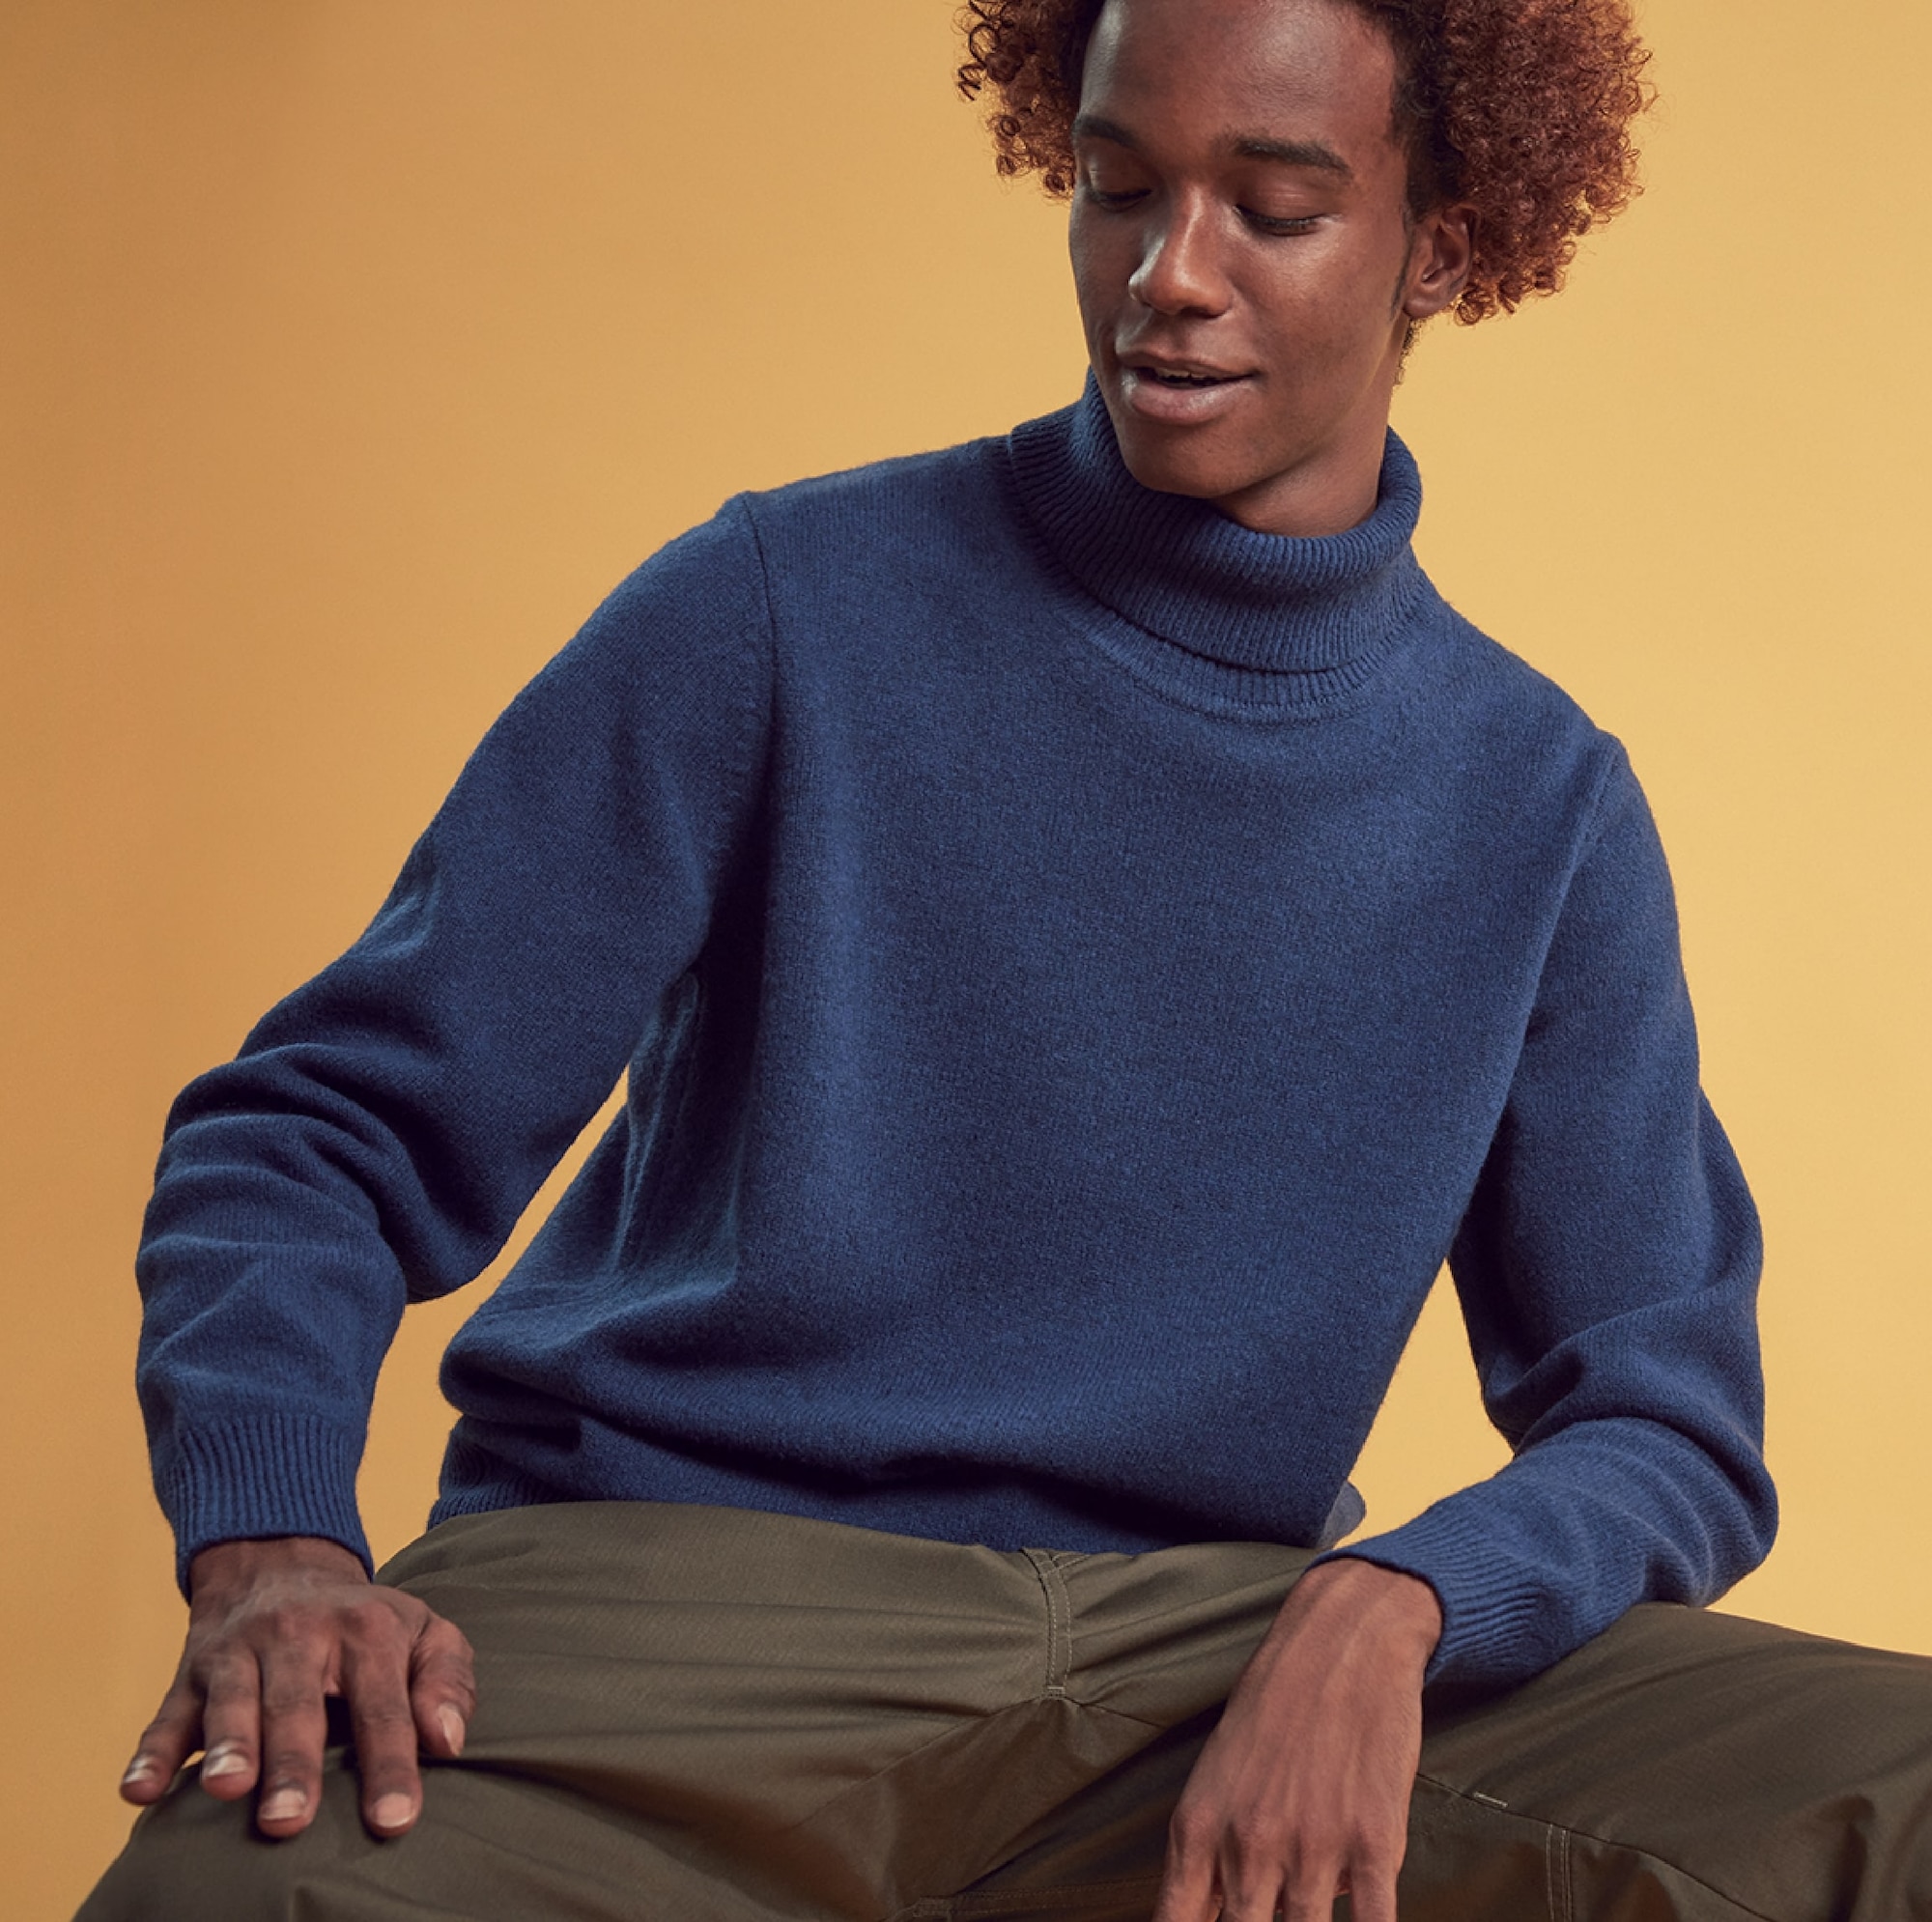 Knitwear collection  Merino cashmere and lambswool jumpers and cardigans   UNIQLO EU